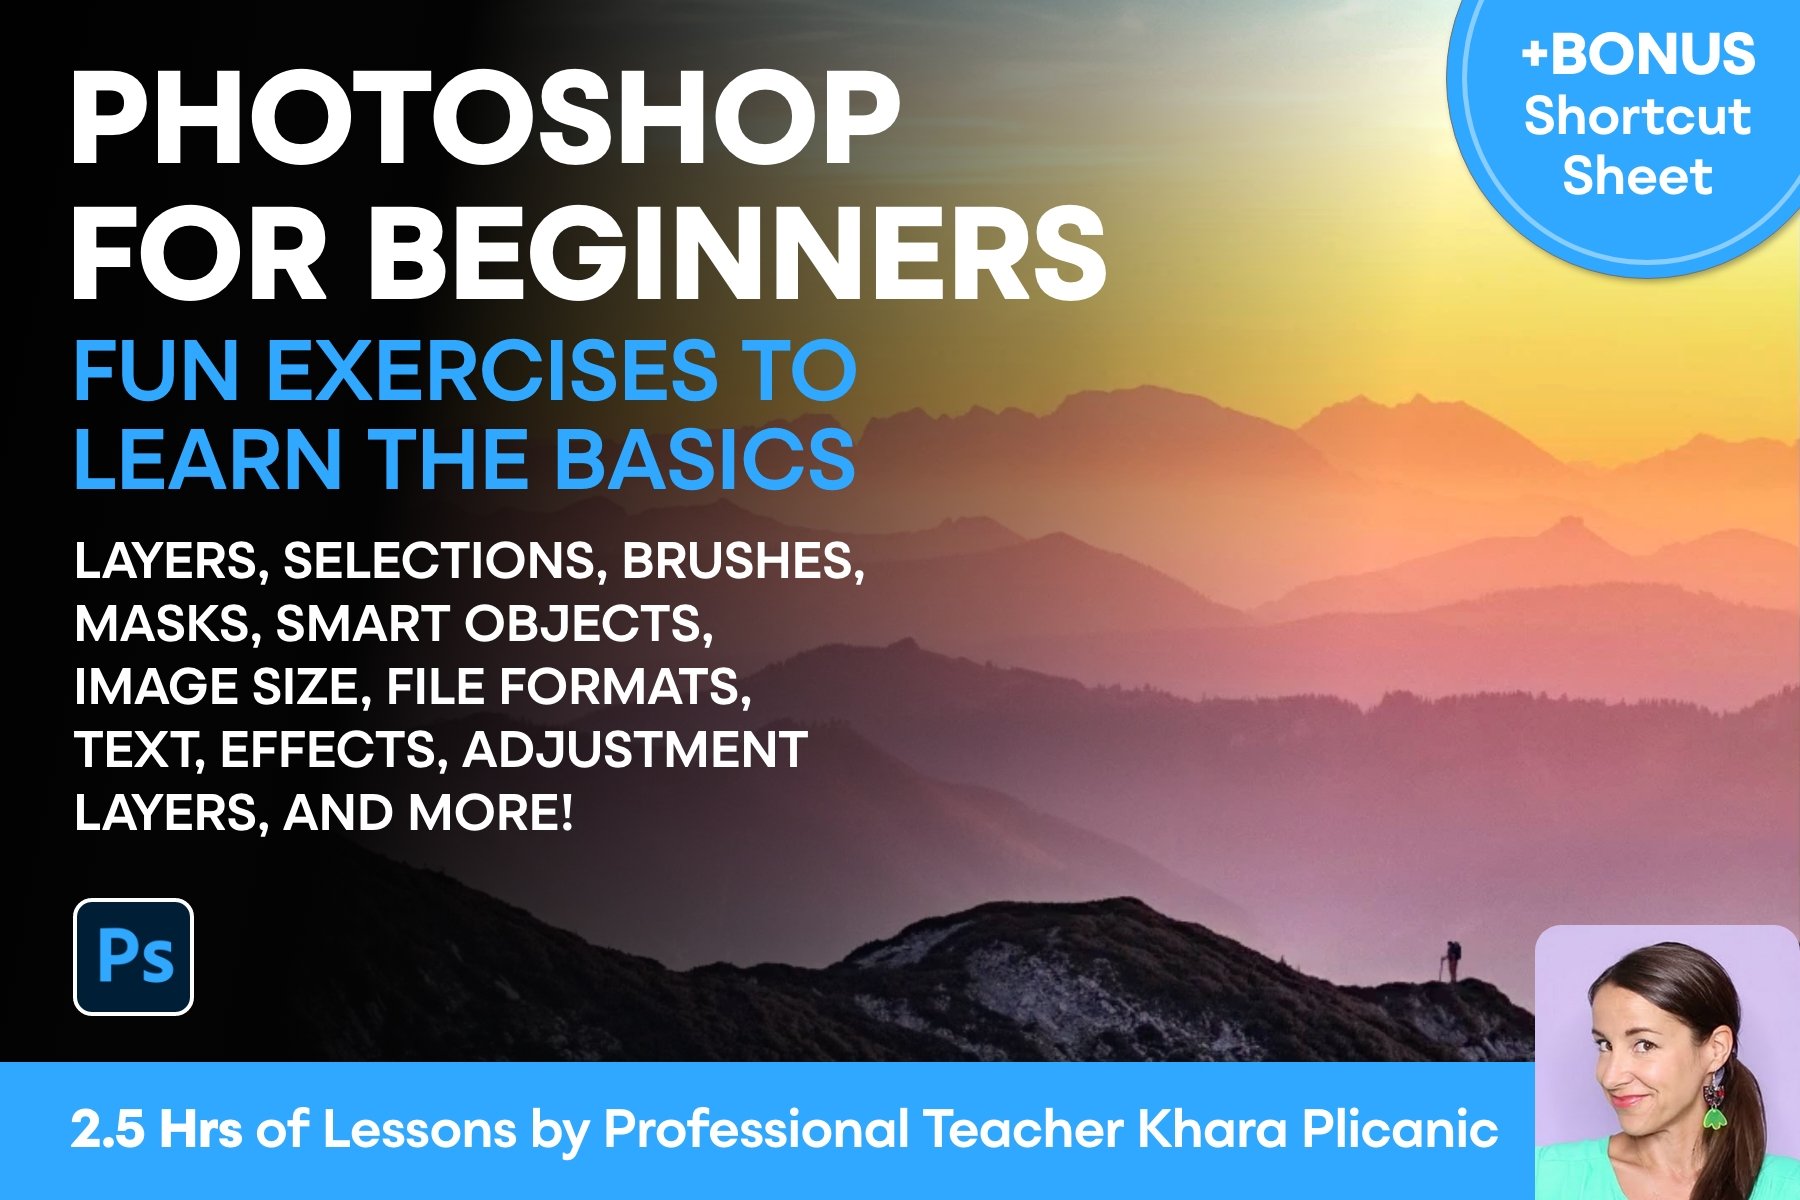 Photoshop For Beginners - Essential Guide